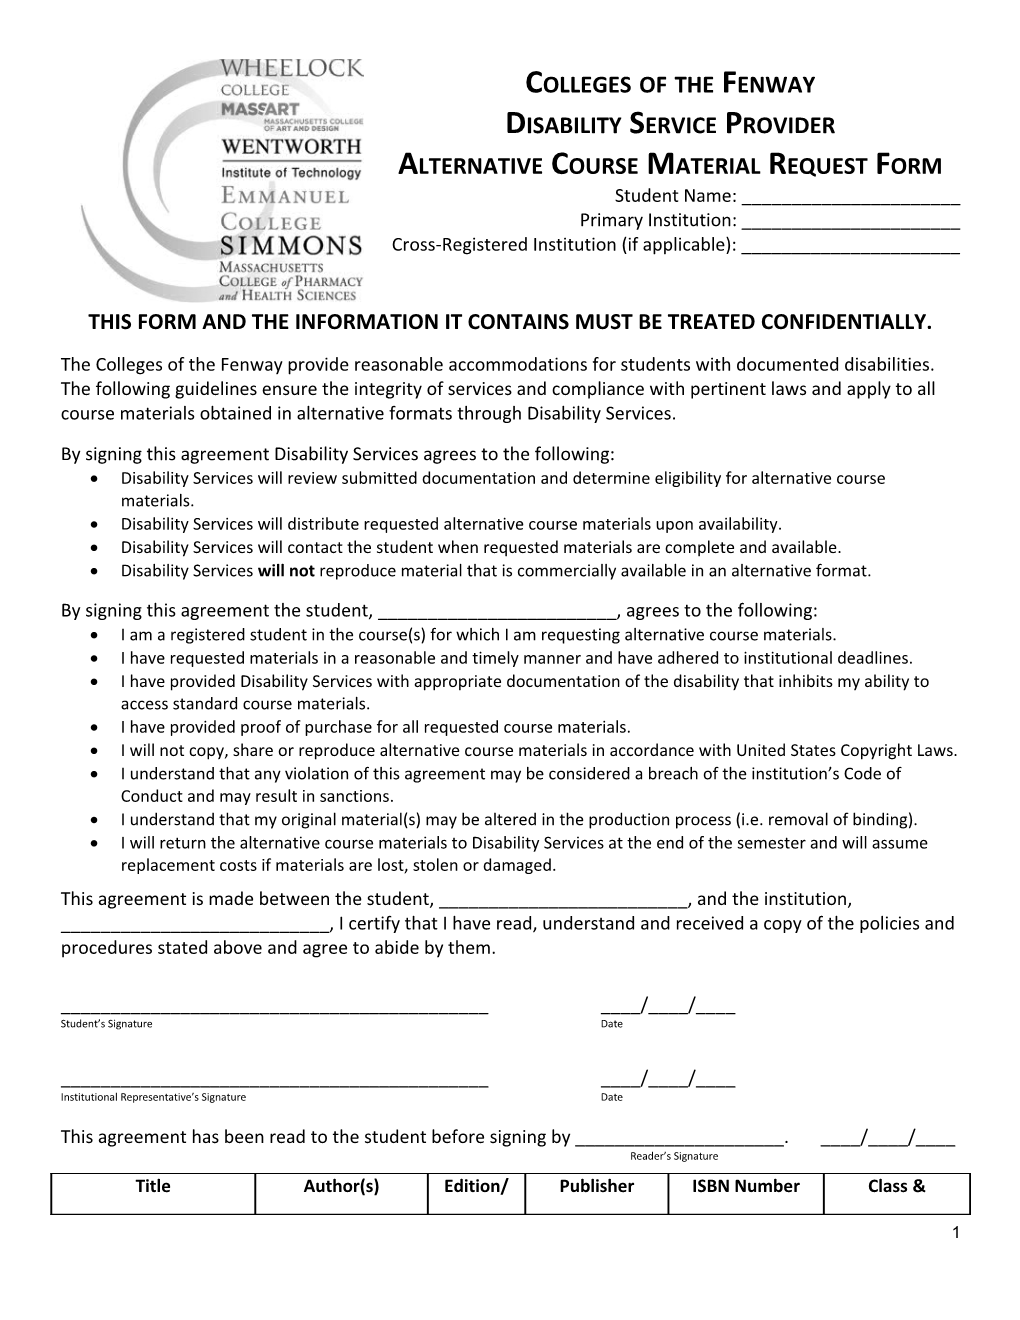 Alternative Course Material Request Form